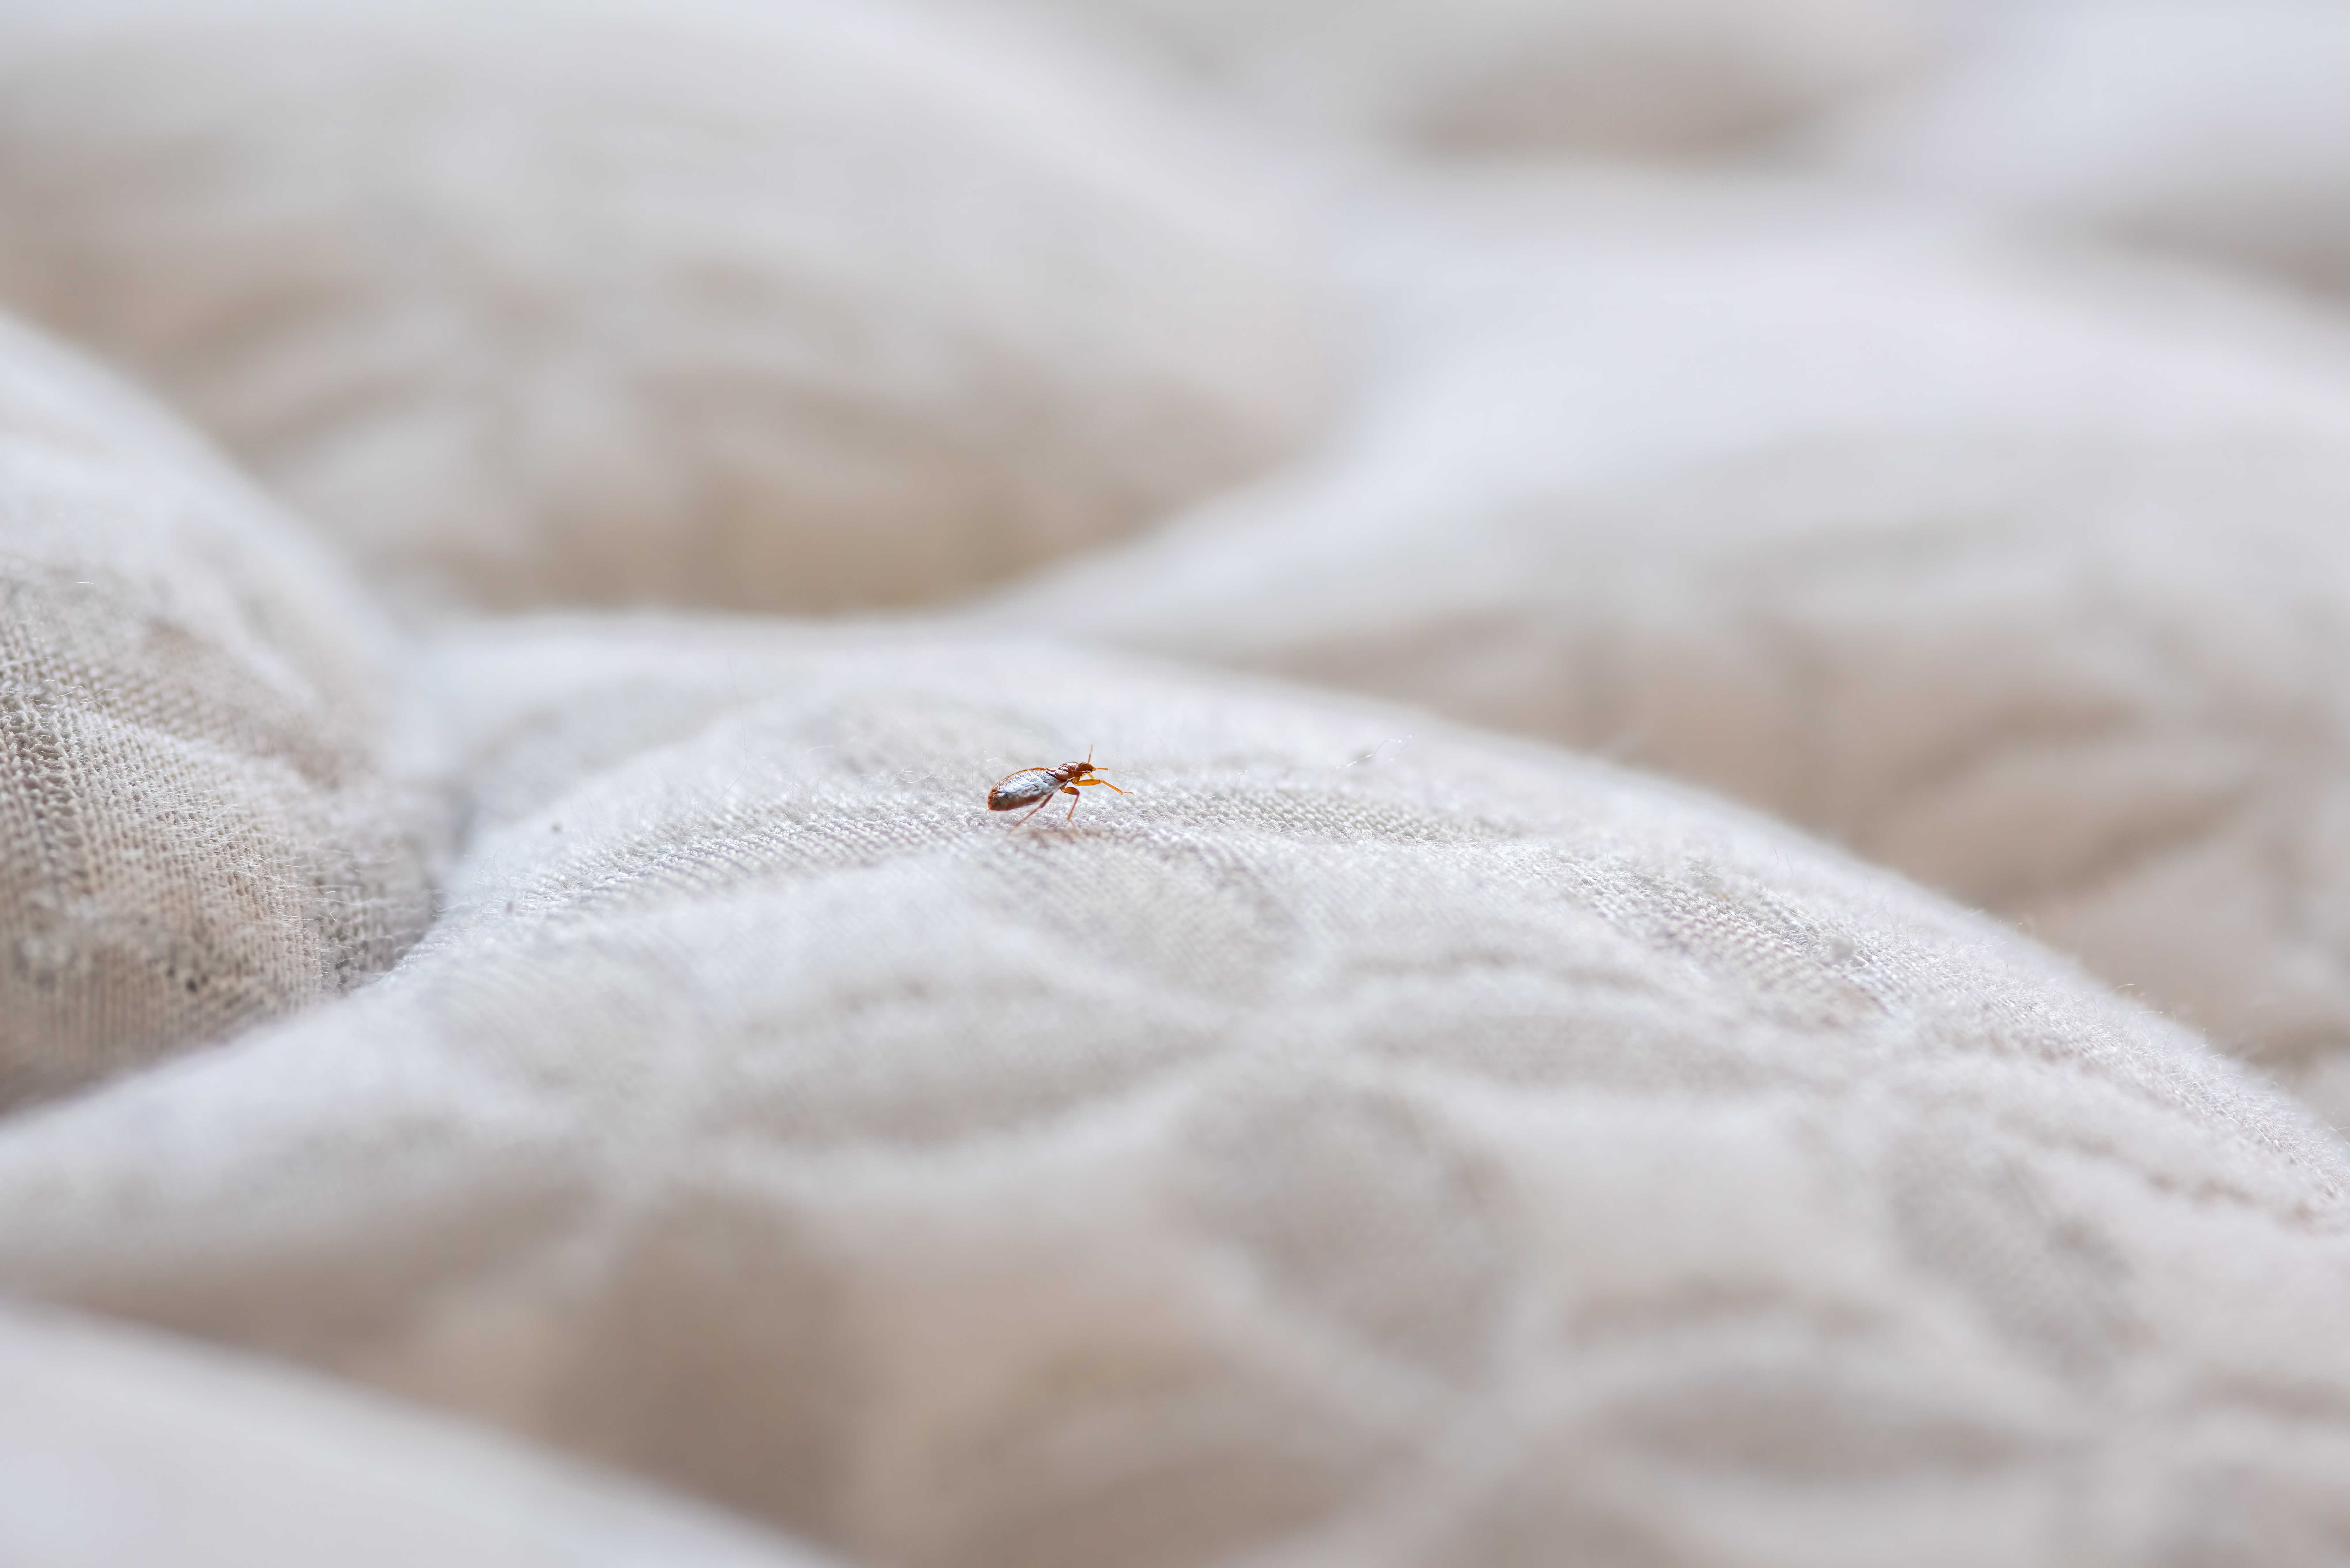 A bed bug on a bed - GGA Pest Management provides bed bug control in Temple, TX.